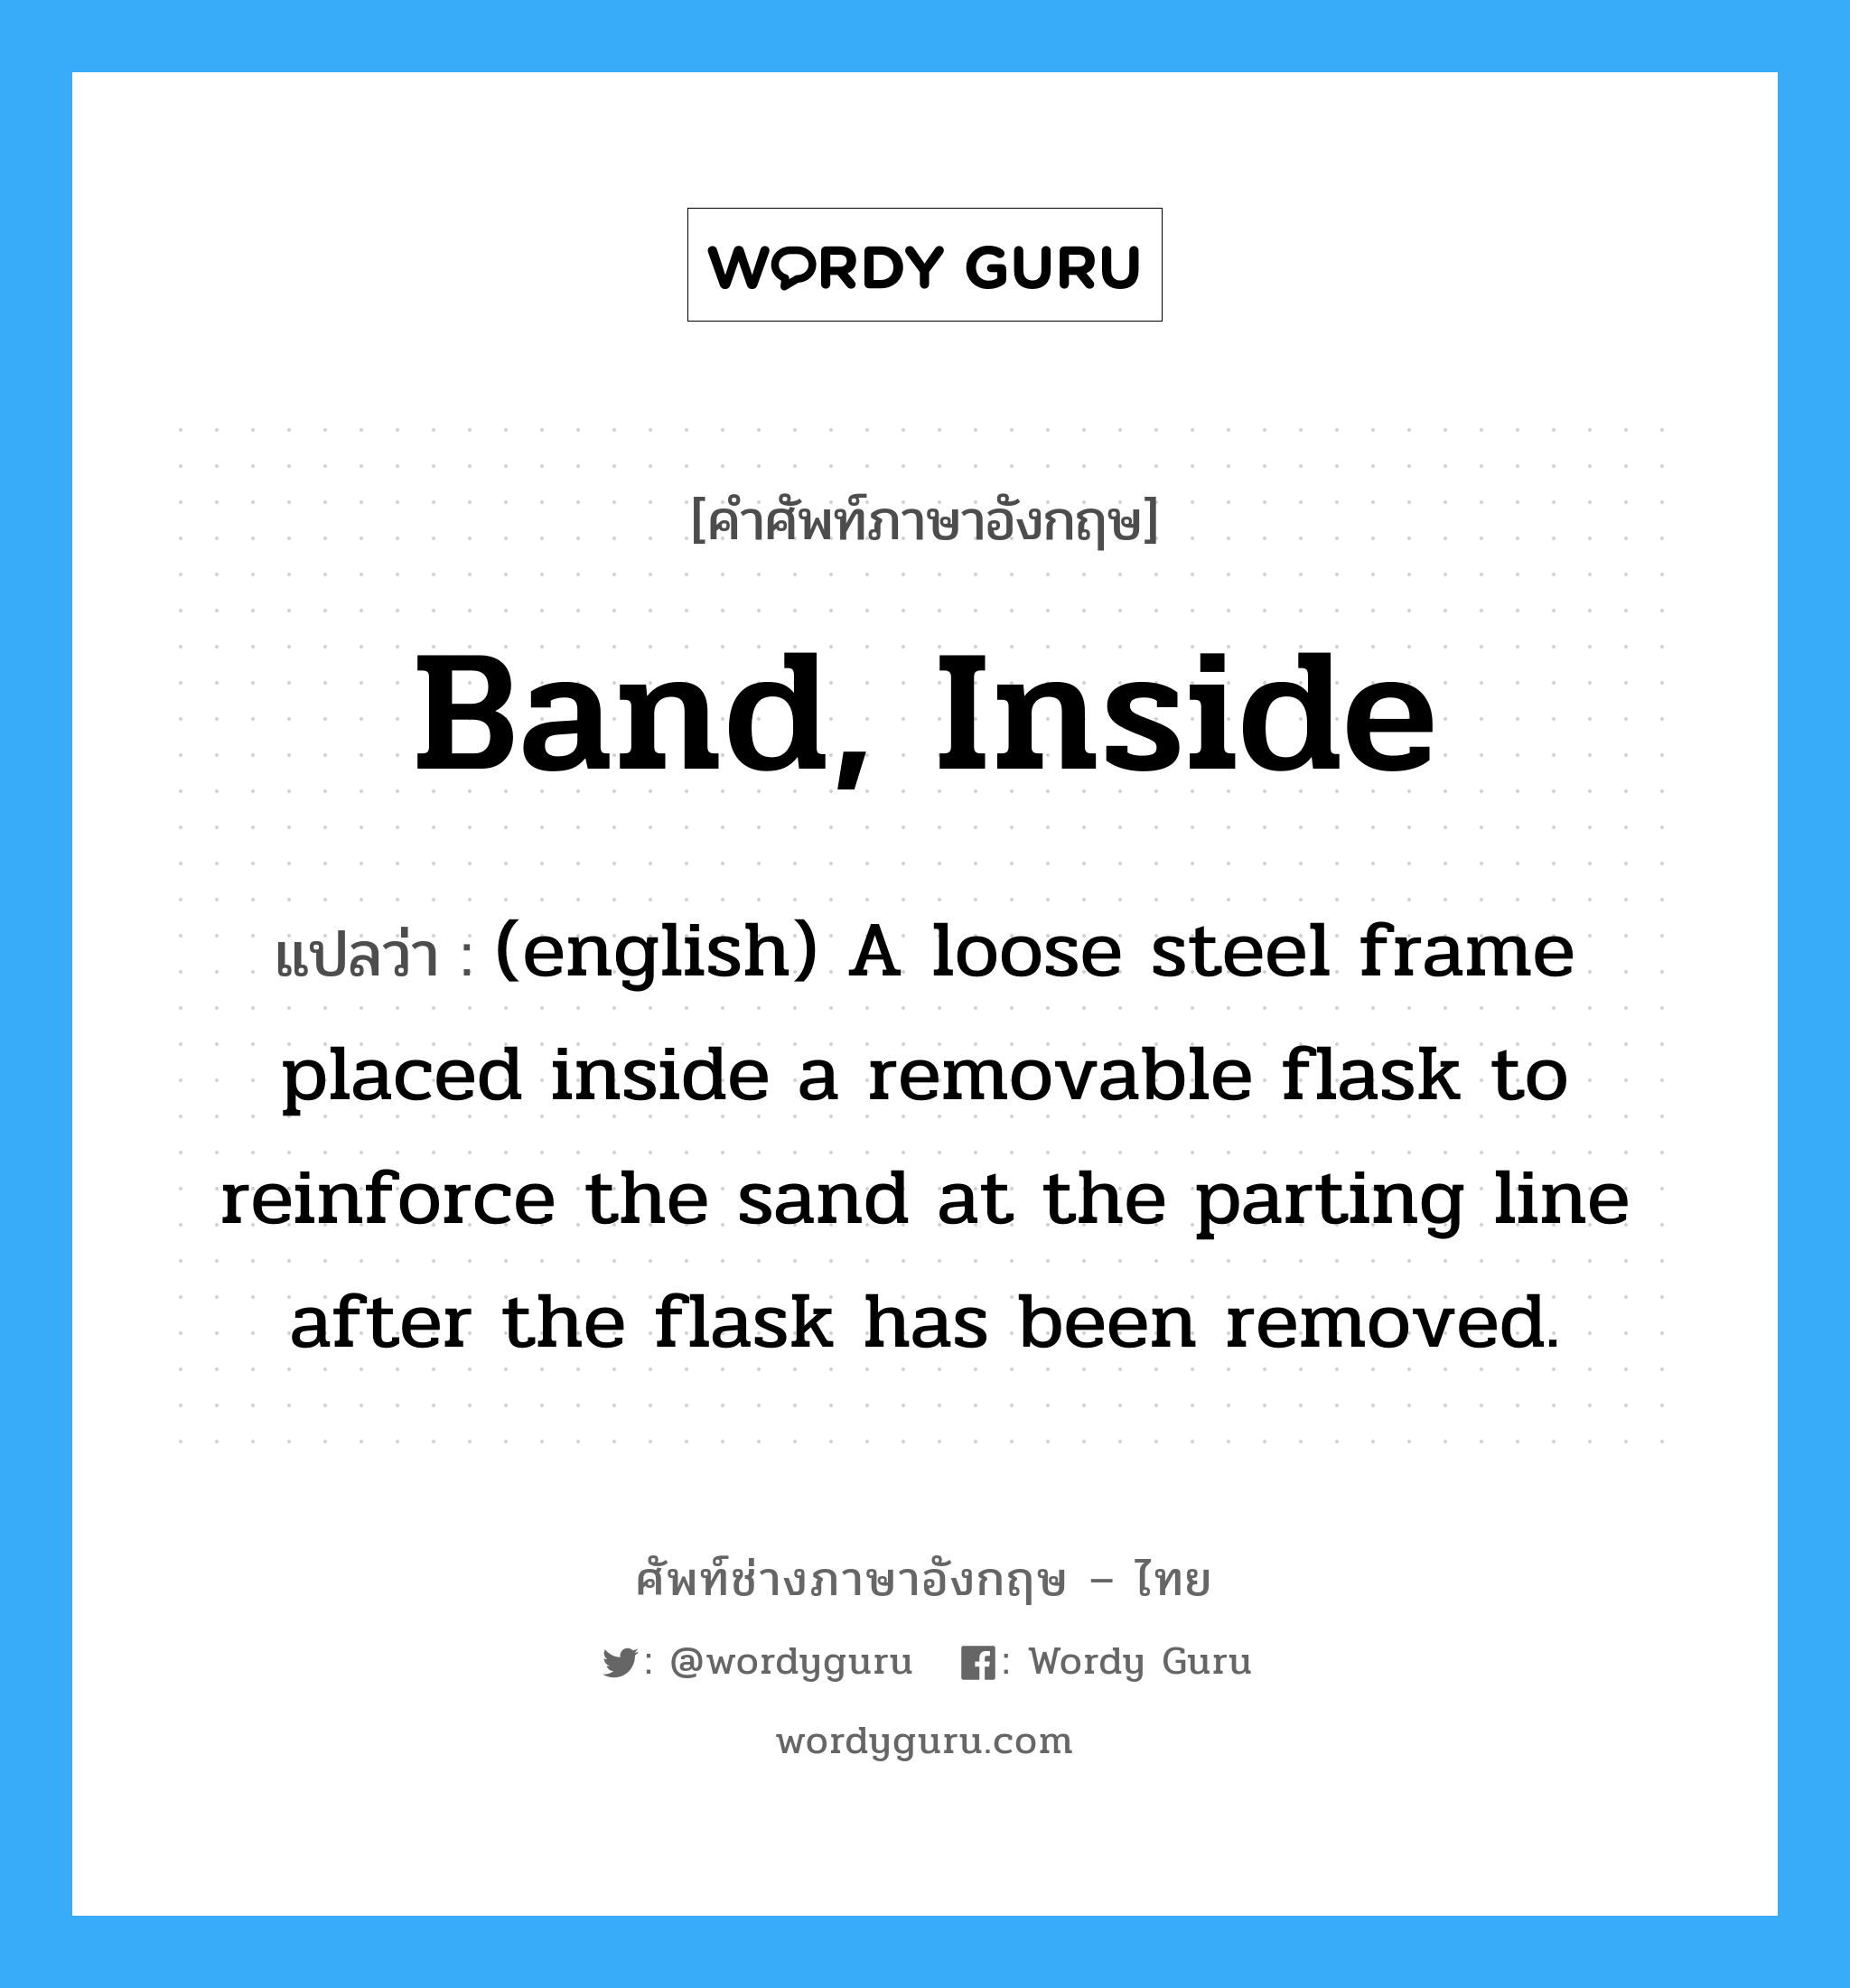 Band, Inside แปลว่า?, คำศัพท์ช่างภาษาอังกฤษ - ไทย Band, Inside คำศัพท์ภาษาอังกฤษ Band, Inside แปลว่า (english) A loose steel frame placed inside a removable flask to reinforce the sand at the parting line after the flask has been removed.